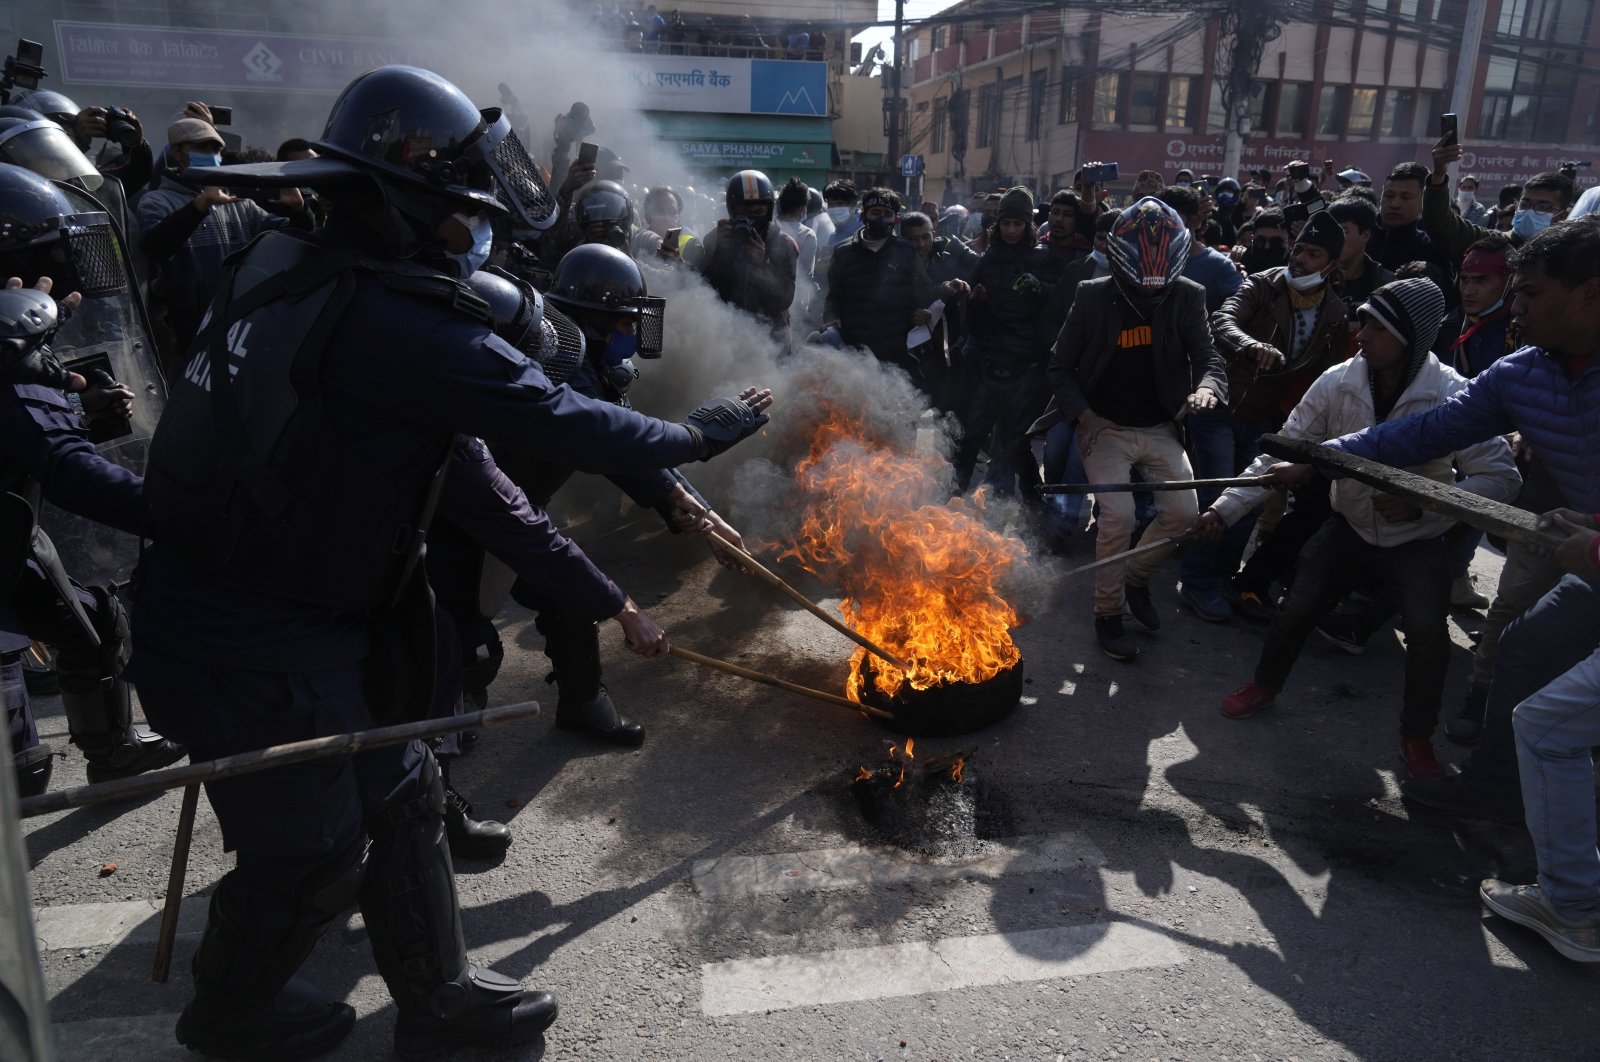 Nepalese protesters opposing a proposed U.S. half billion dollars grant for Nepal clash with police outside as the parliament debates the contentious aid in Kathmandu, Nepal, Feb. 20, 2022. (AP Photo)